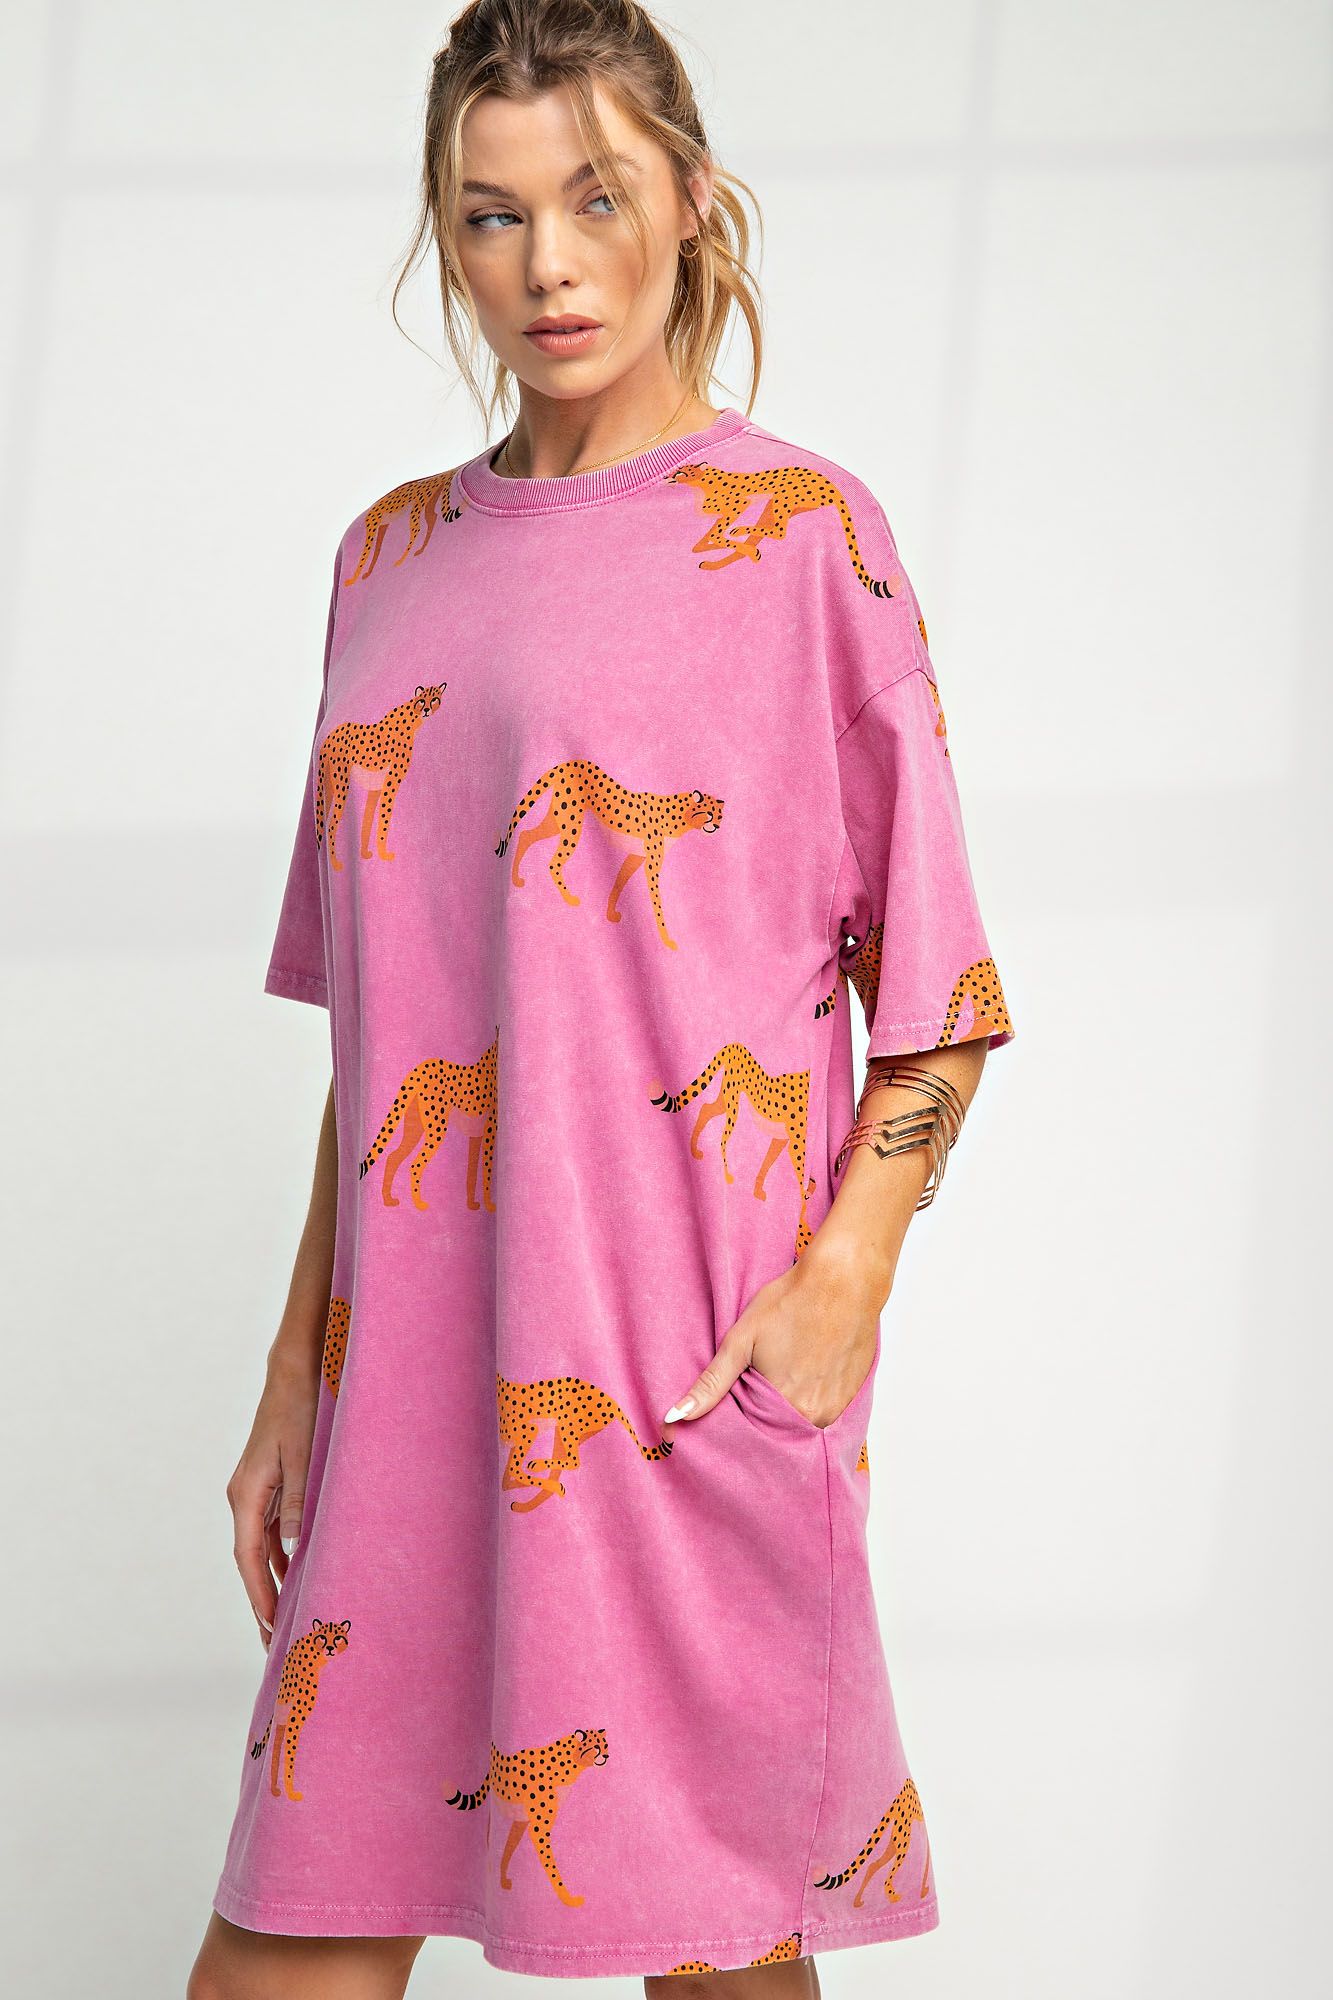 In the Wild Mineral Washed Cheetah Print T Shirt Dress in Magenta